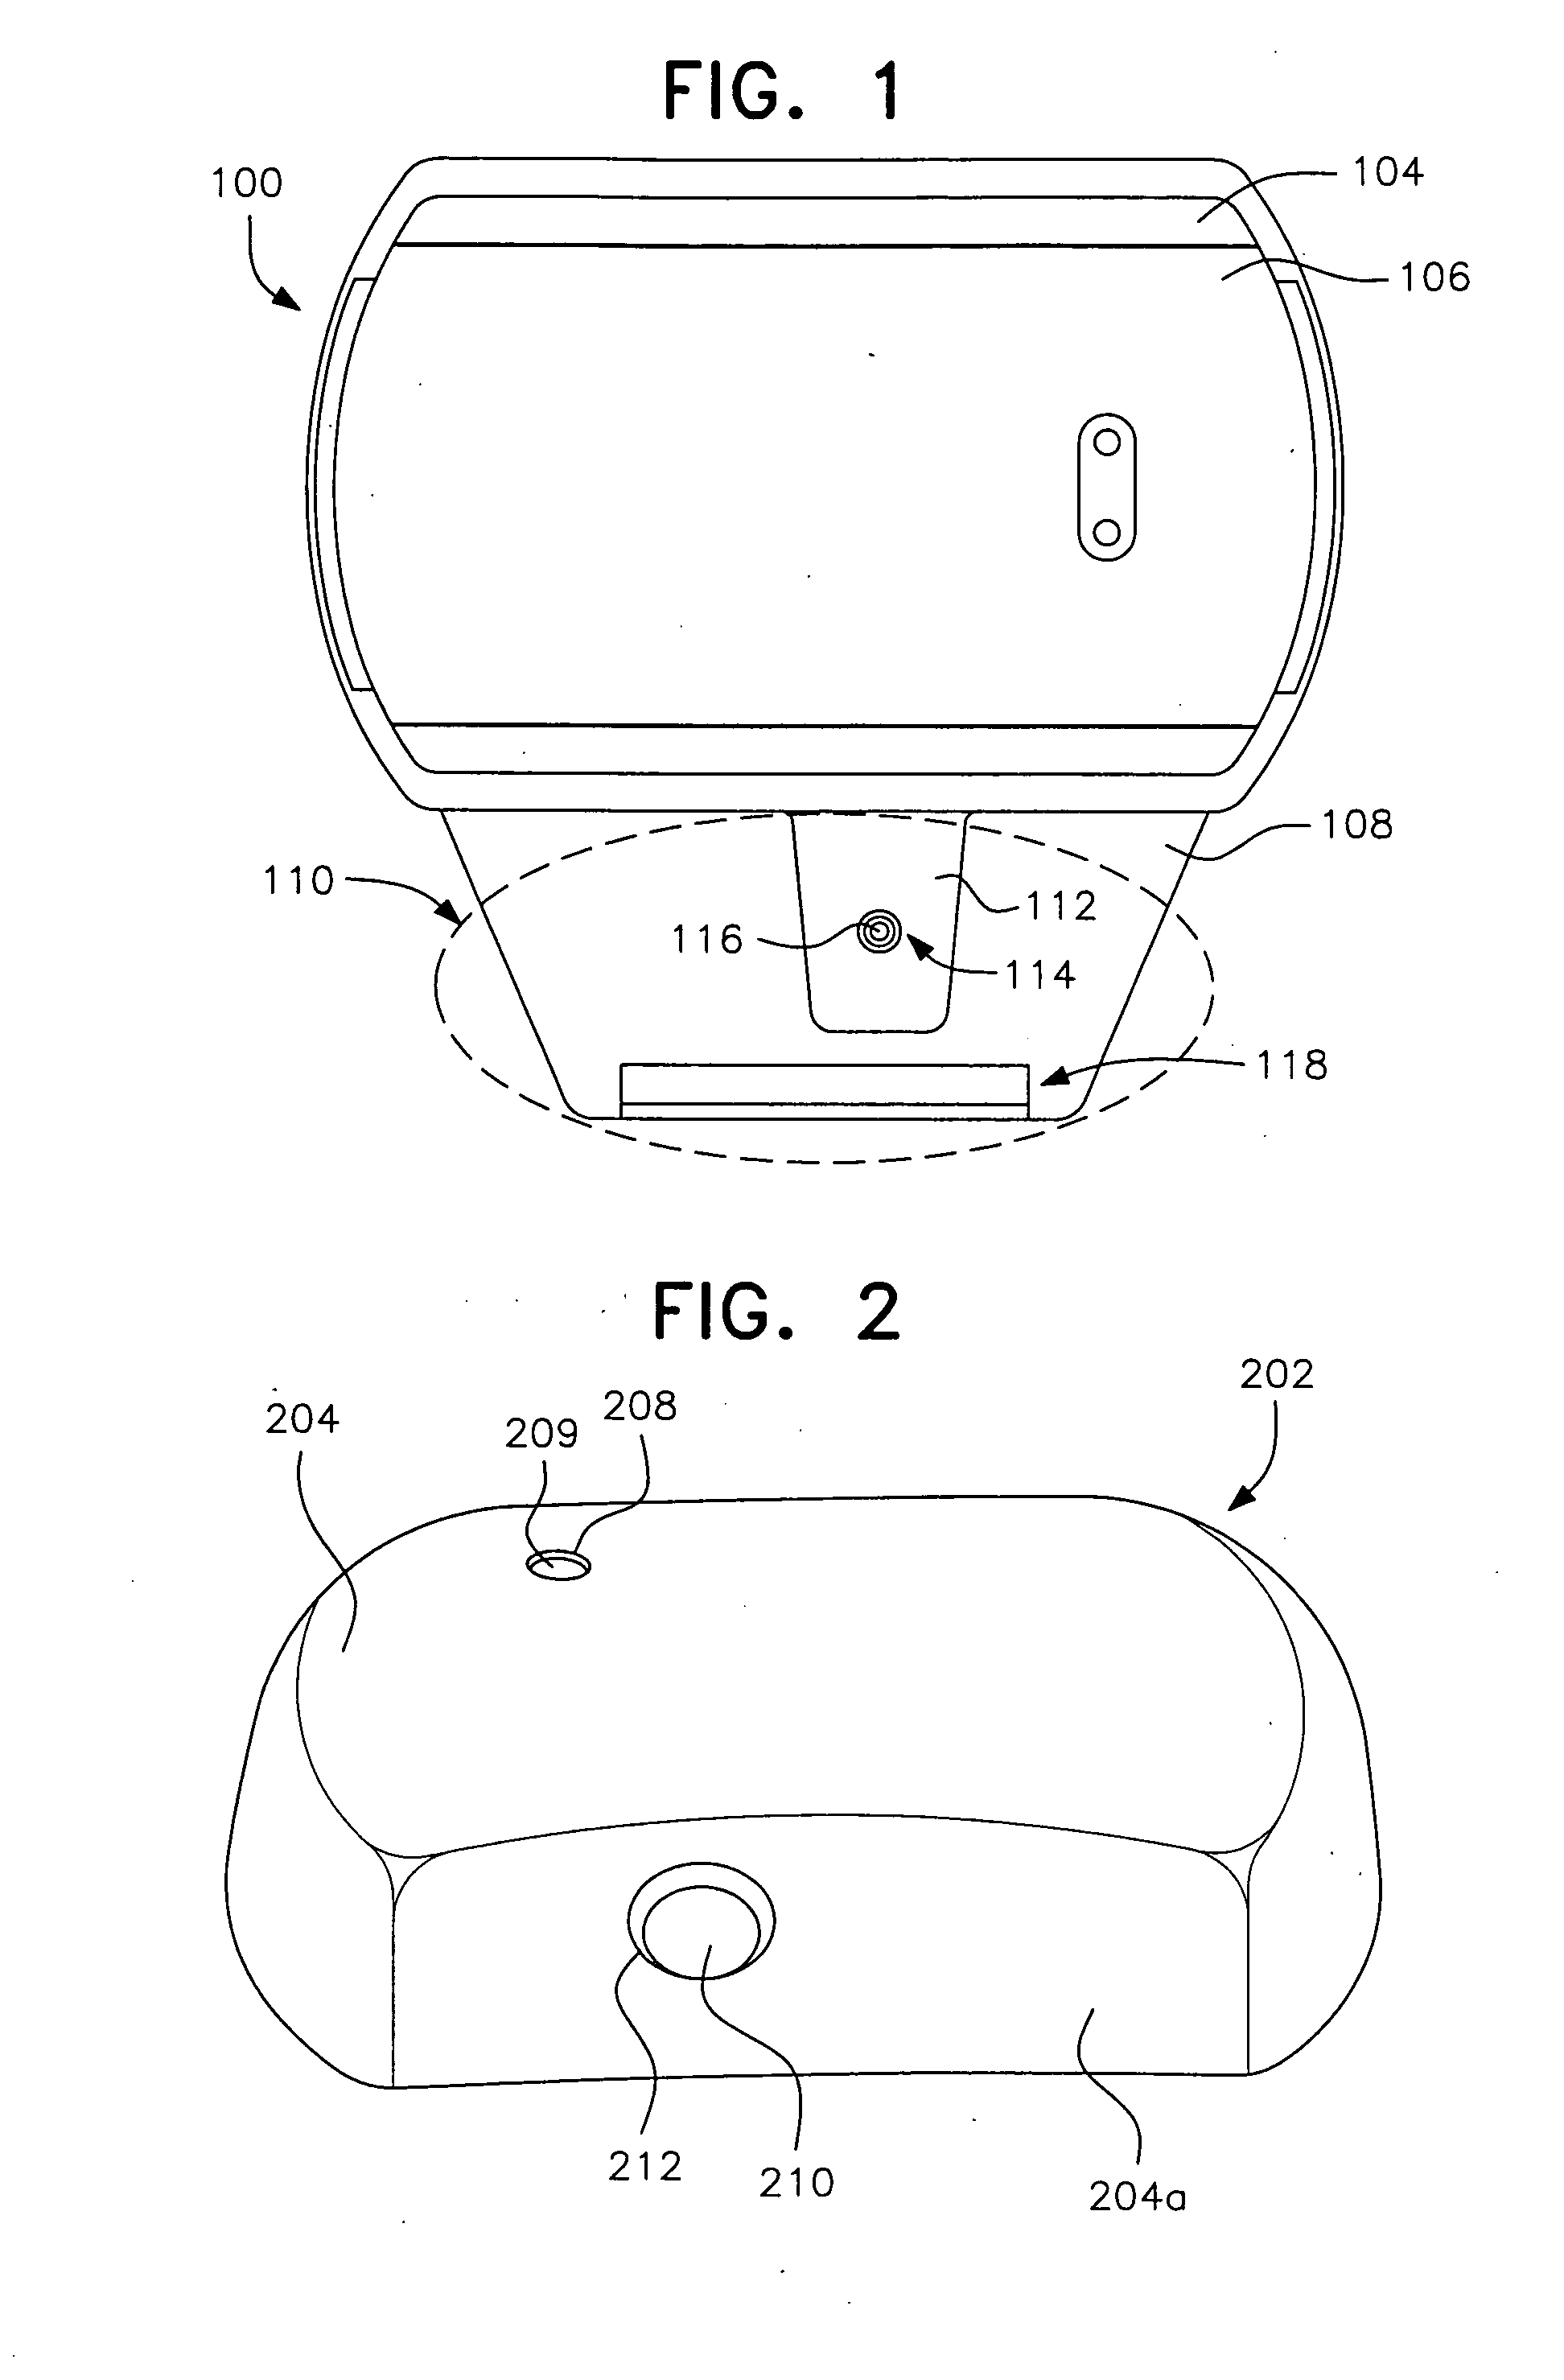 Control station with integrated collar recharging docking station for pet electronics products